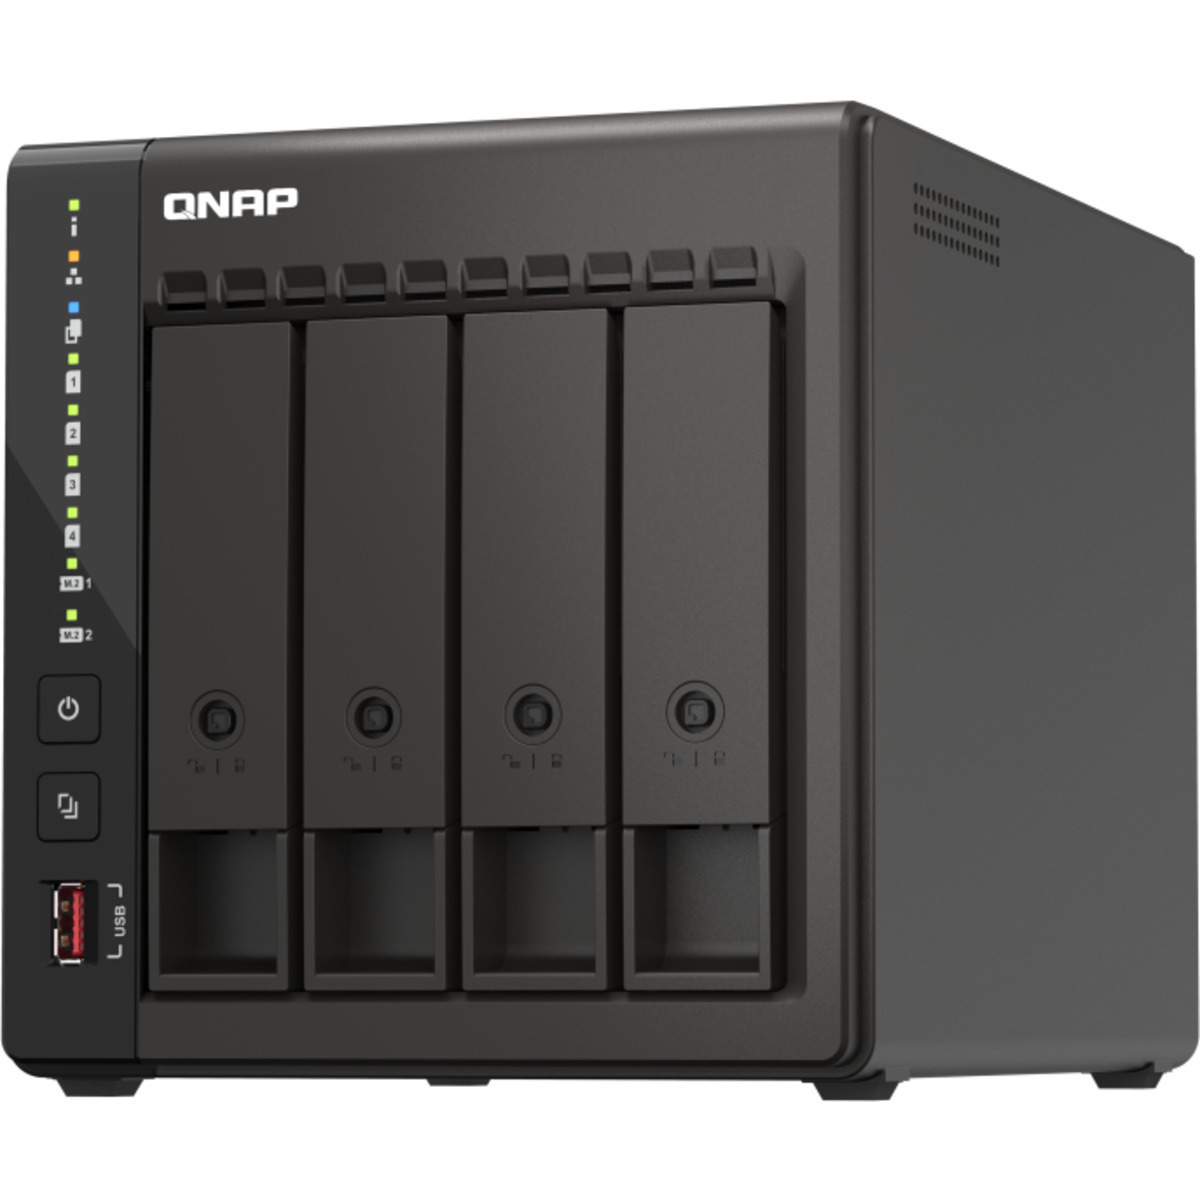 QNAP TS-453E 8tb 4-Bay Desktop Multimedia / Power User / Business NAS - Network Attached Storage Device 2x4tb Seagate IronWolf Pro ST4000NT001 3.5 7200rpm SATA 6Gb/s HDD NAS Class Drives Installed - Burn-In Tested TS-453E